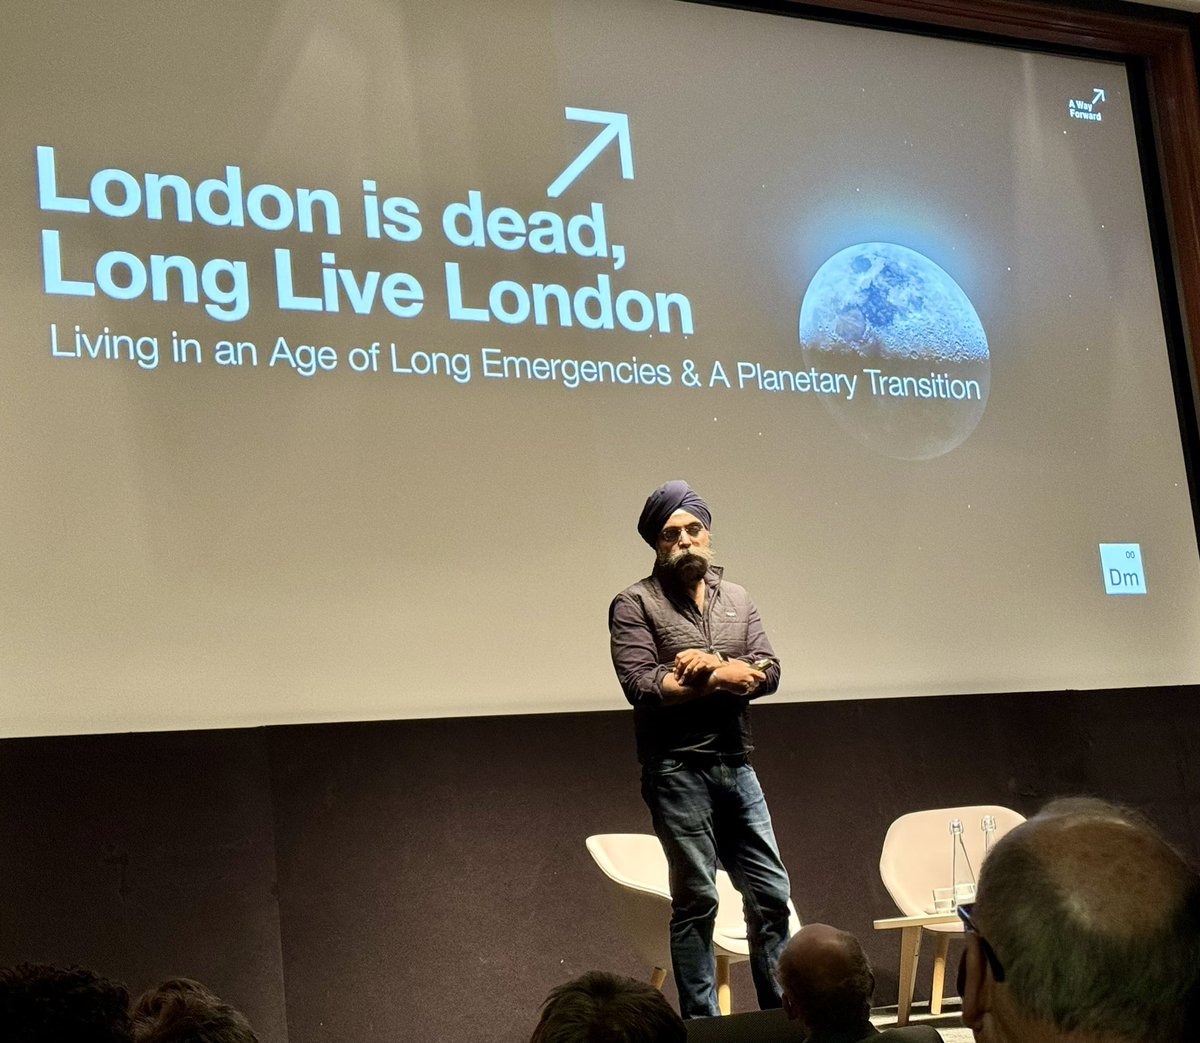 provocative stuff this evening in the @londonsoc Banister Fletcher lecture at @riba from @indy_johar @DarkMatter_Labs